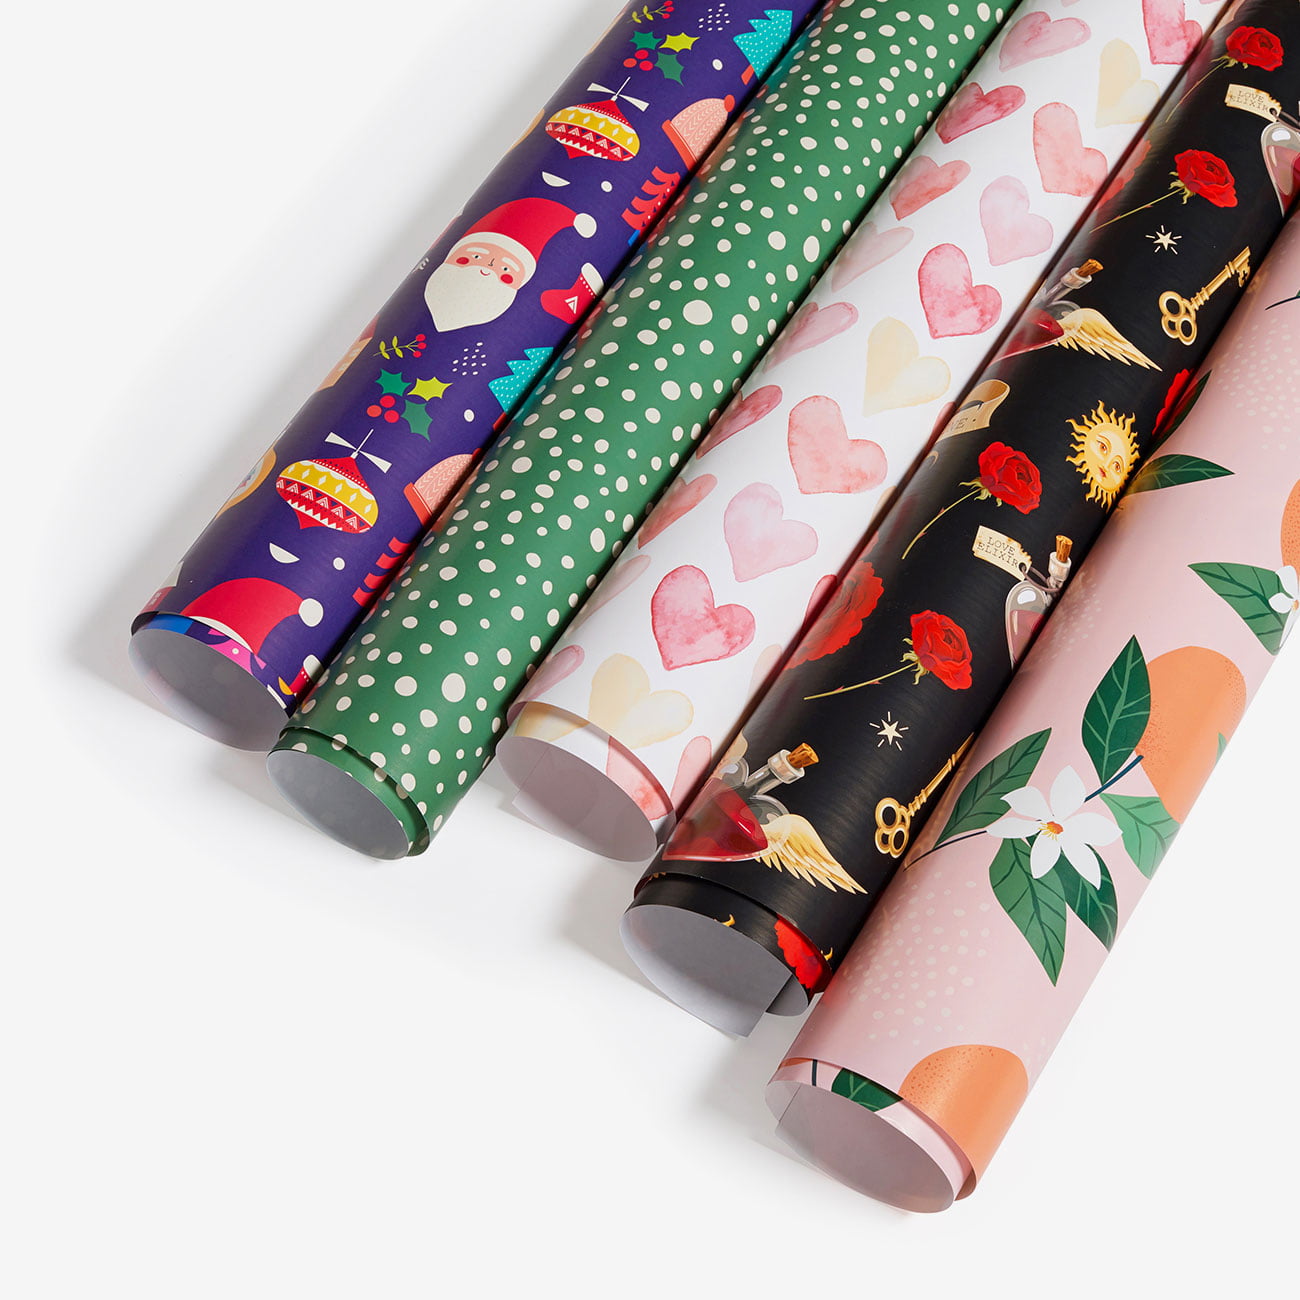 Print on Demand Wrapping Paper - Print API, Dropshipping